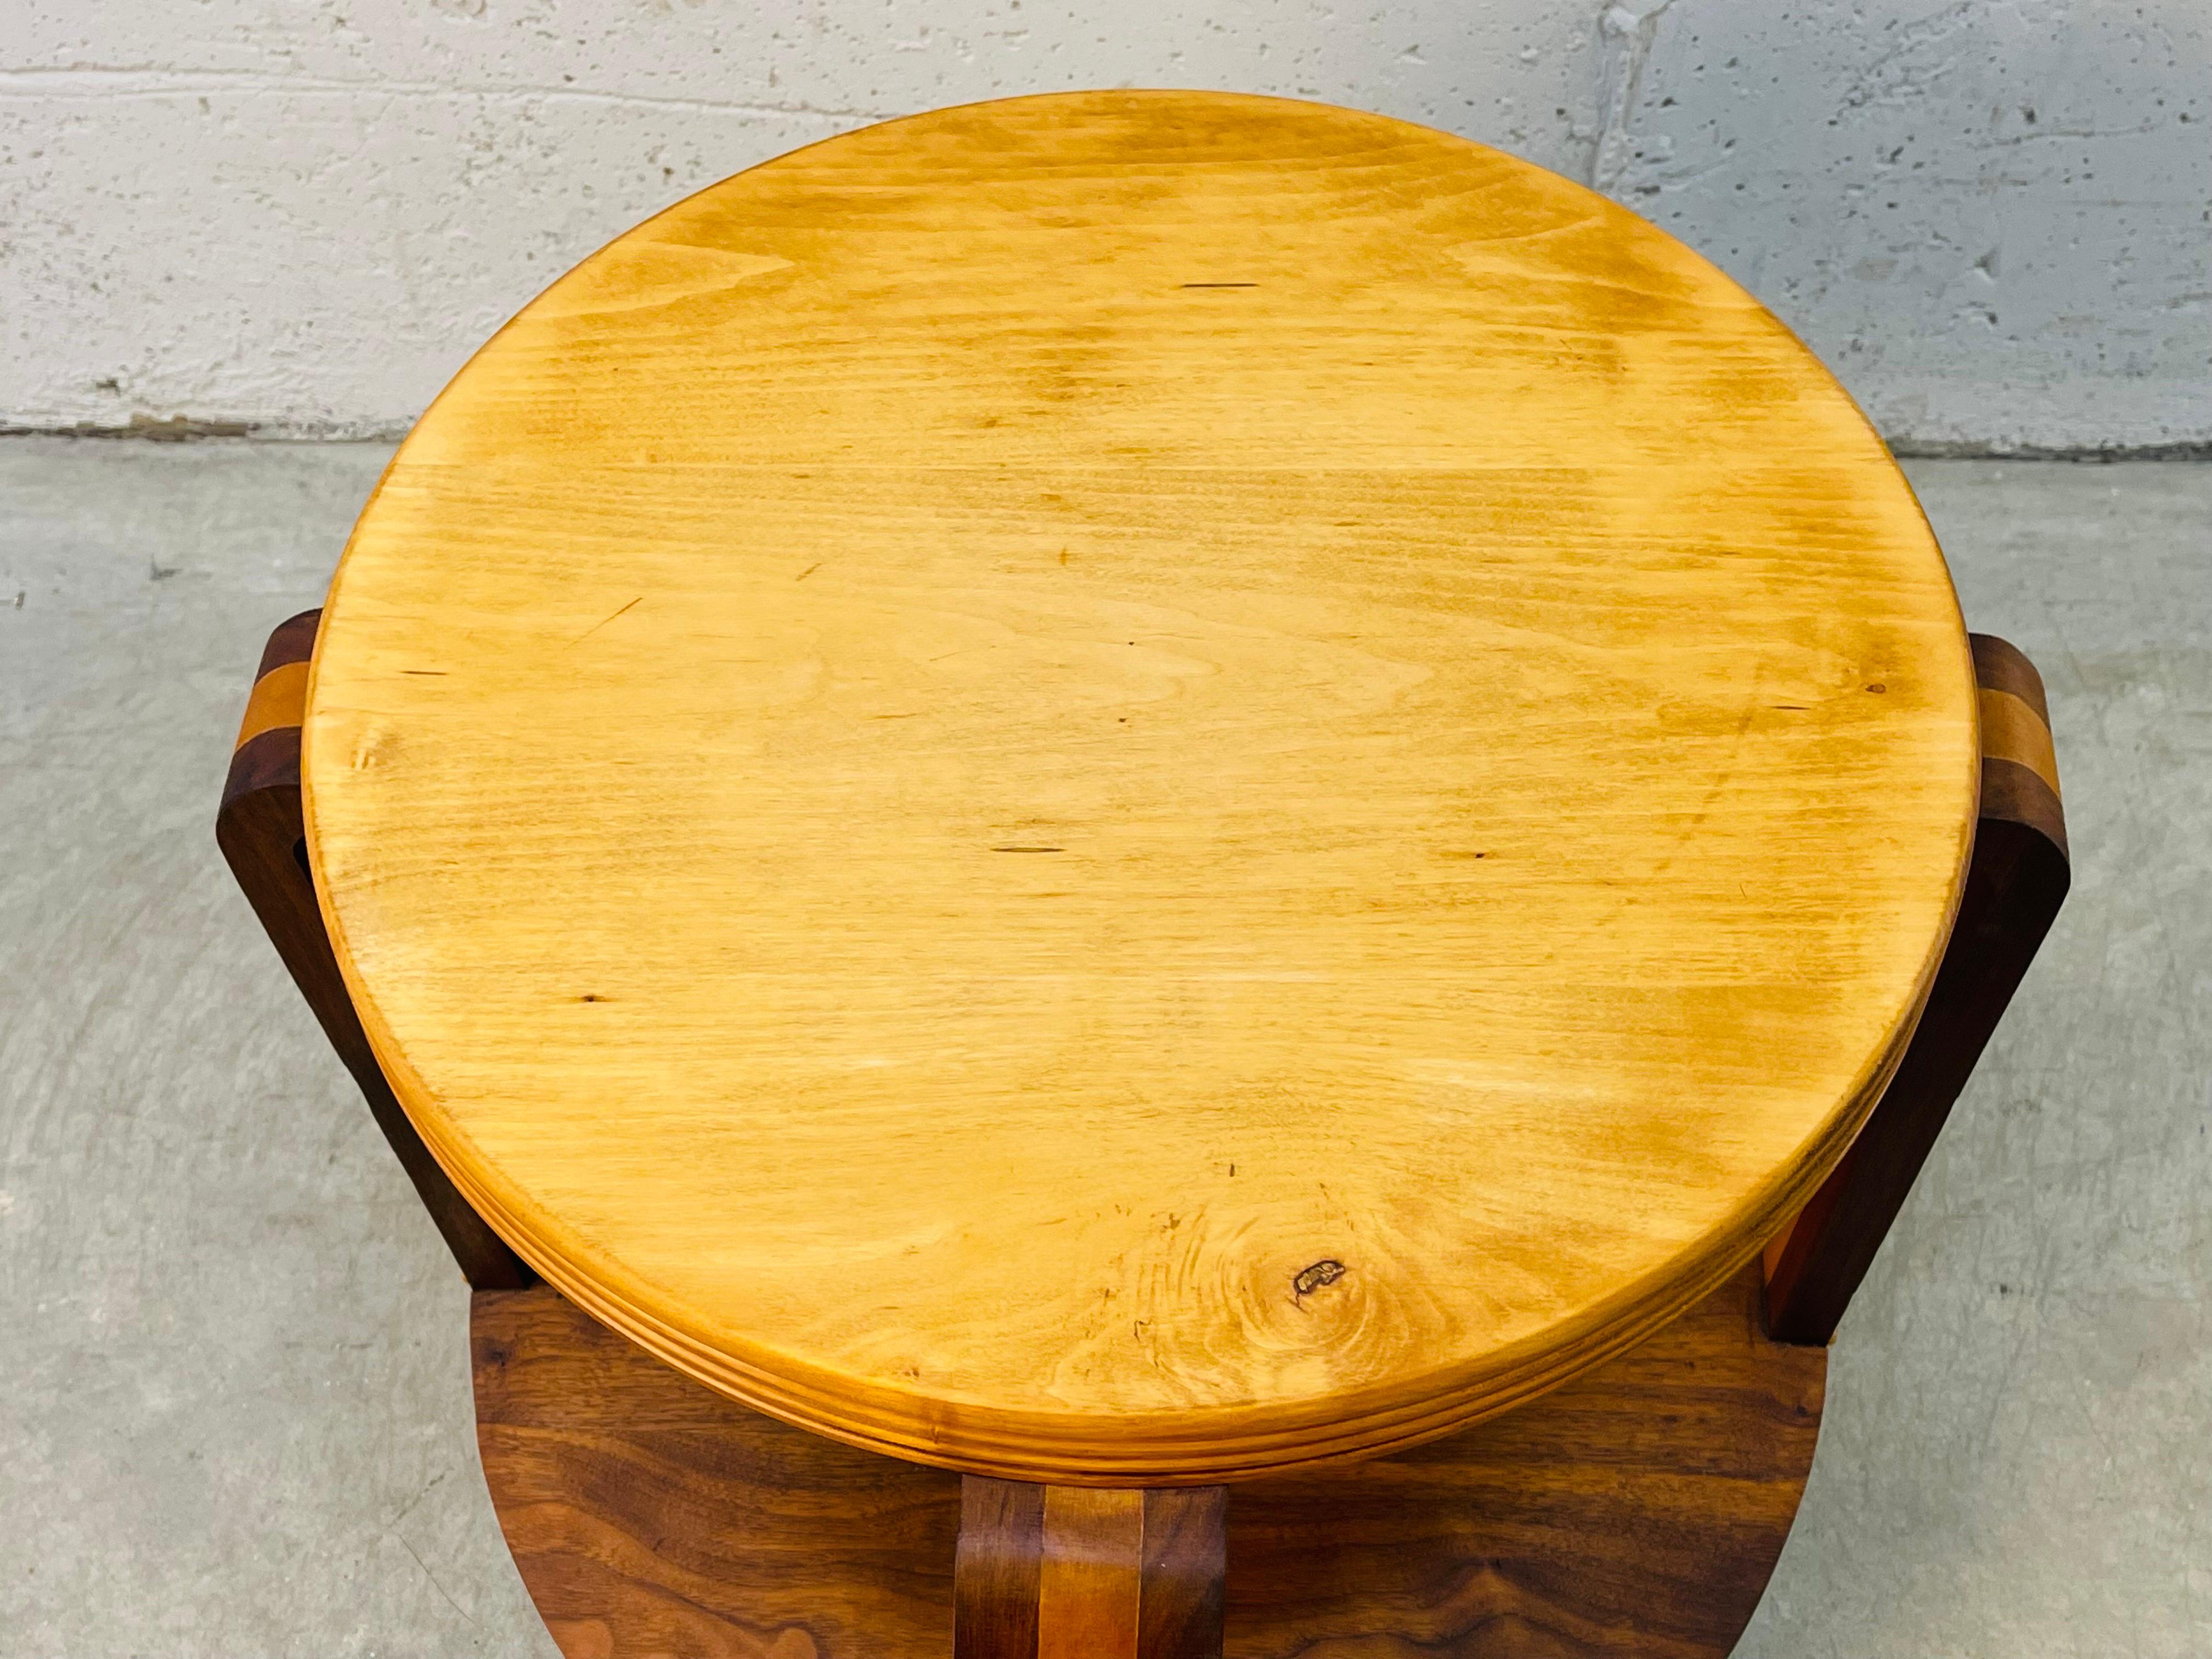 Art Deco round solid wood side table made from maple and walnut woods. The legs have the combination of woods. The table has all rounded edges. The table is solid and sturdy. No marks. 